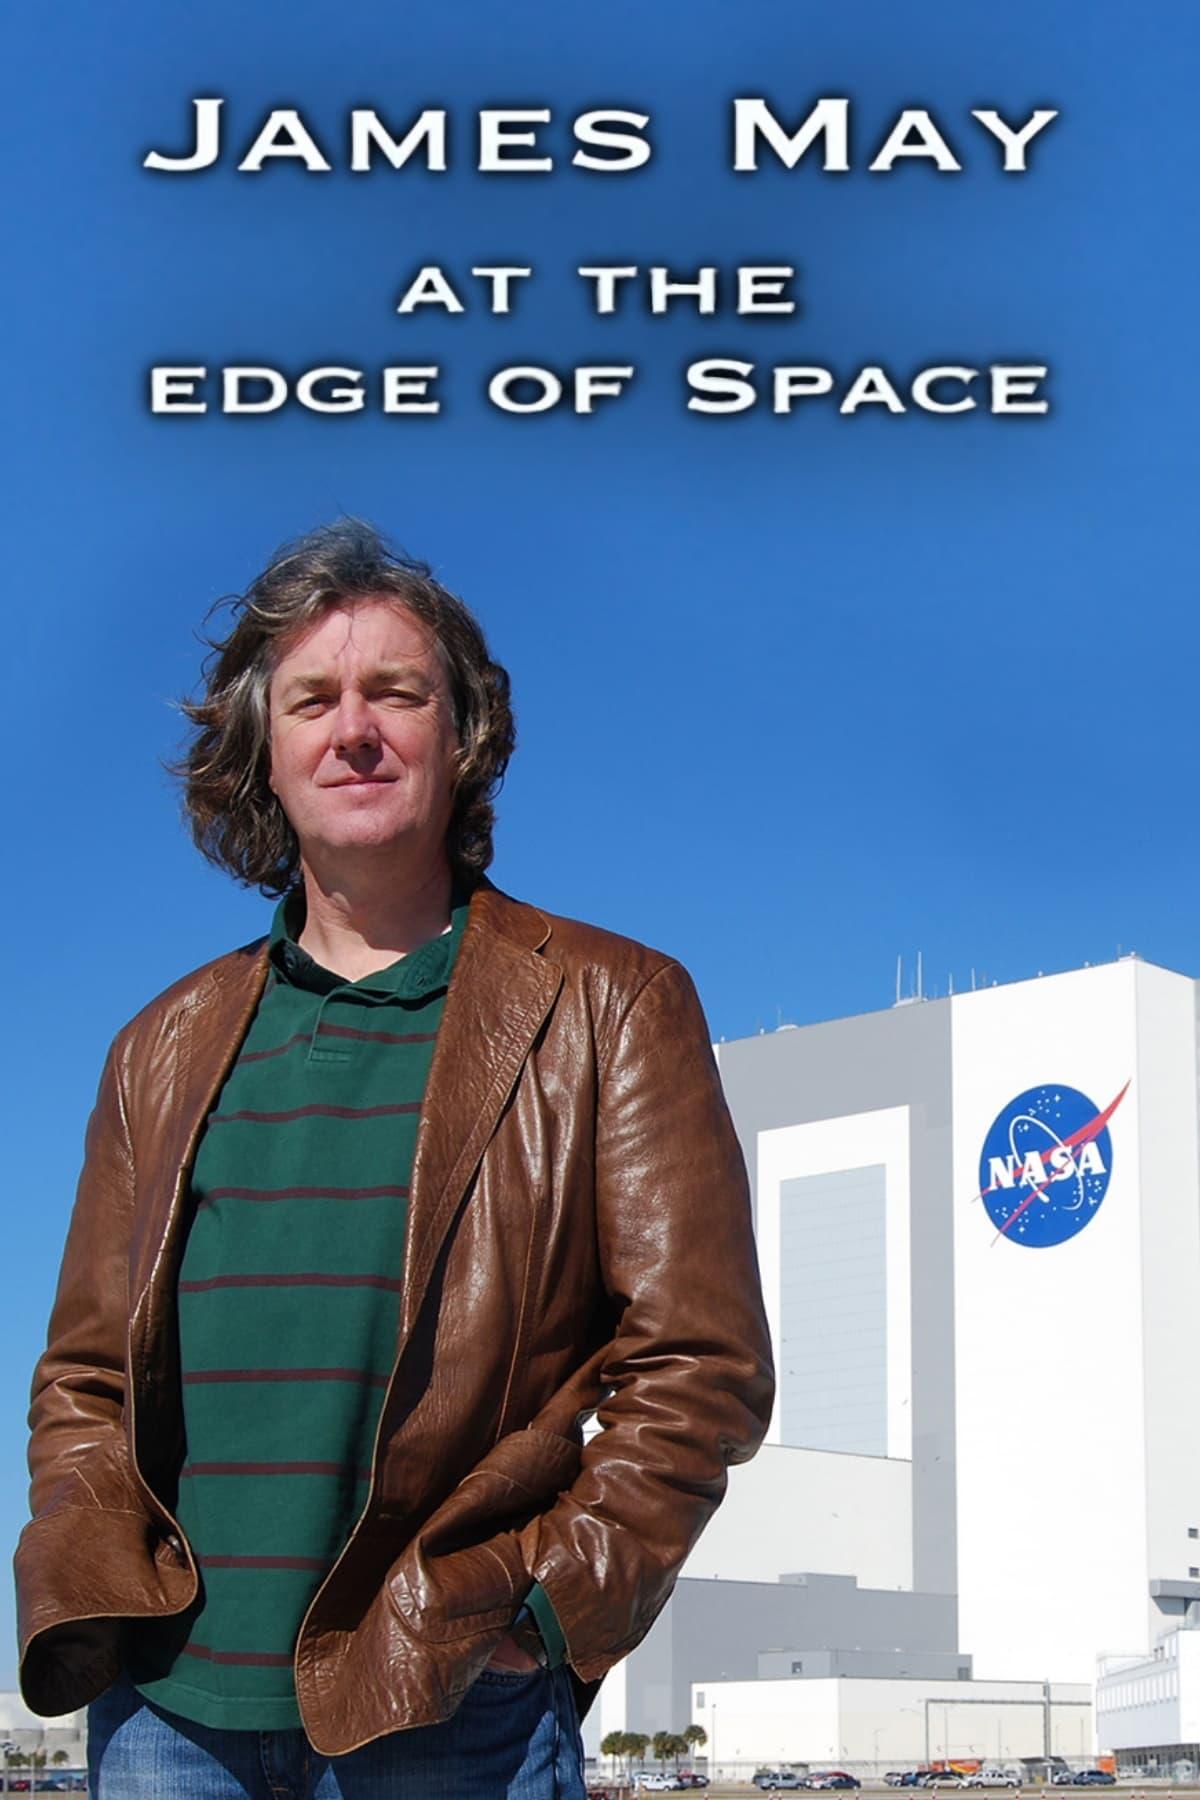 James May at the Edge of Space poster